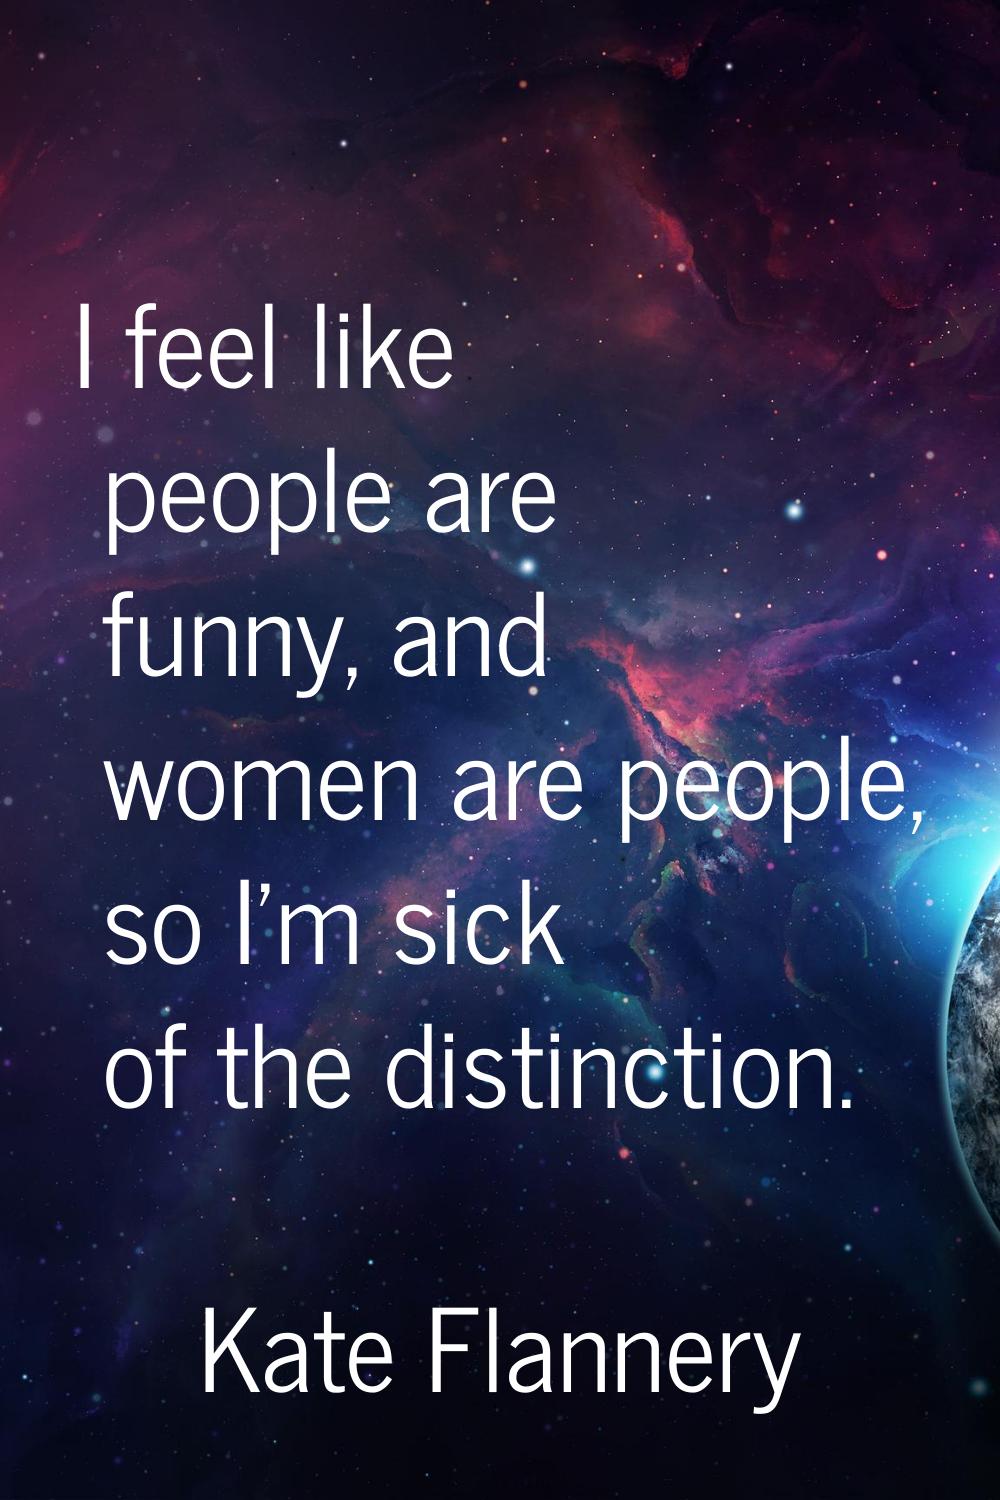 I feel like people are funny, and women are people, so I'm sick of the distinction.